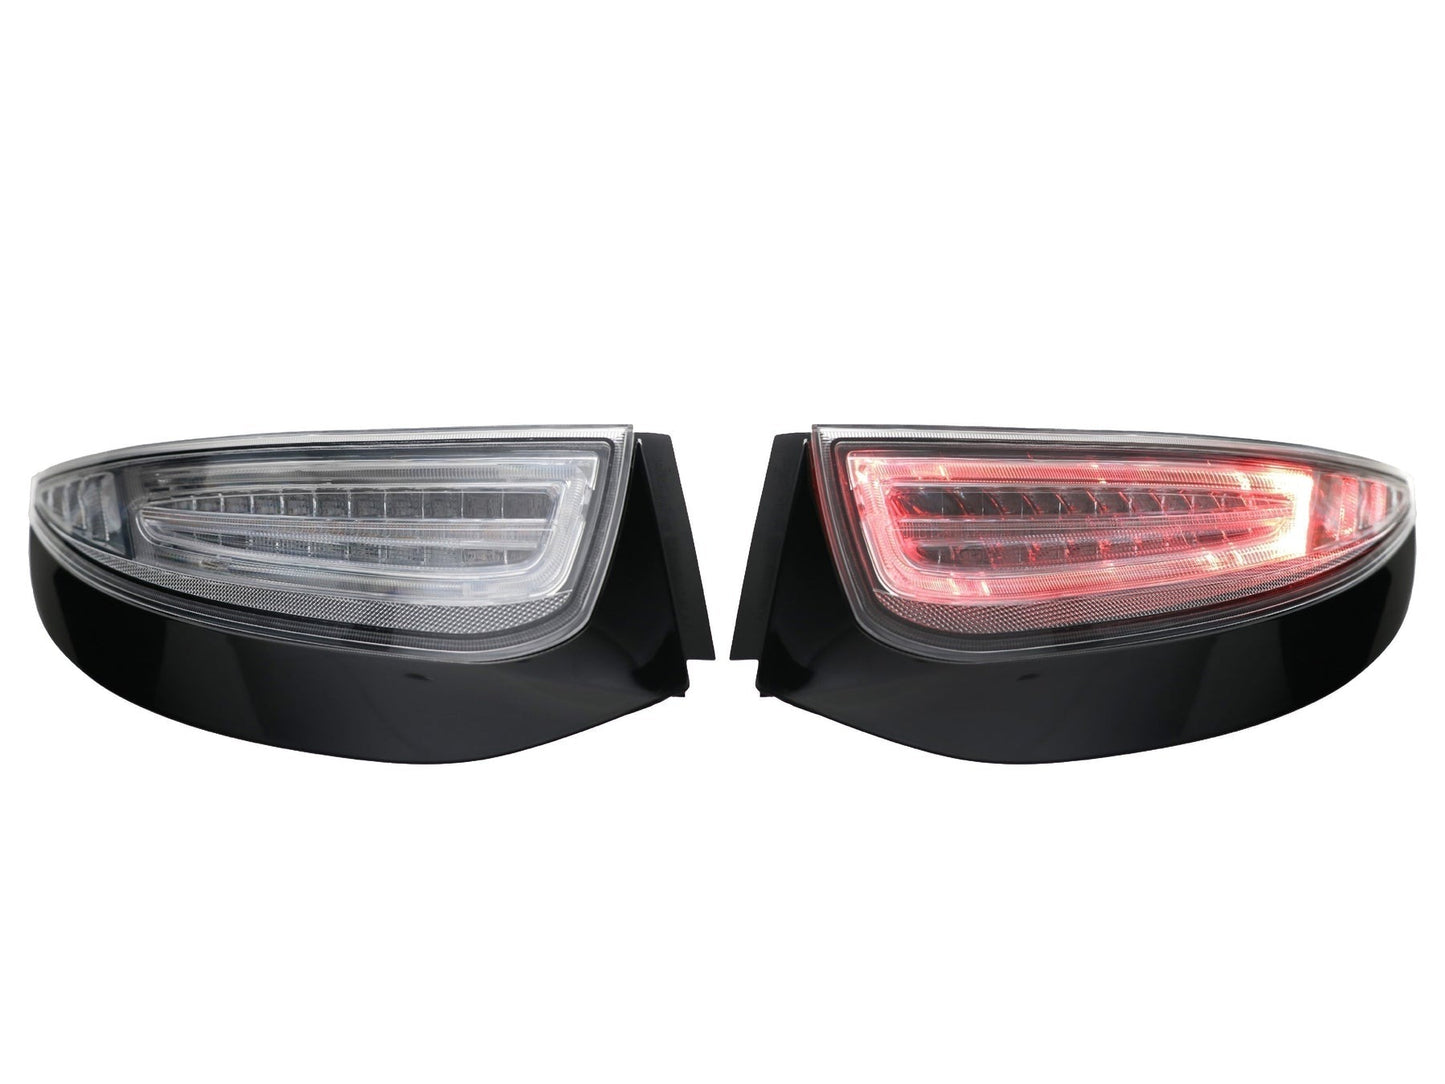 2009-2012 Porsche 911 / Carrera 997 LED Light Bar All Clear Tail Light - Made by DEPO